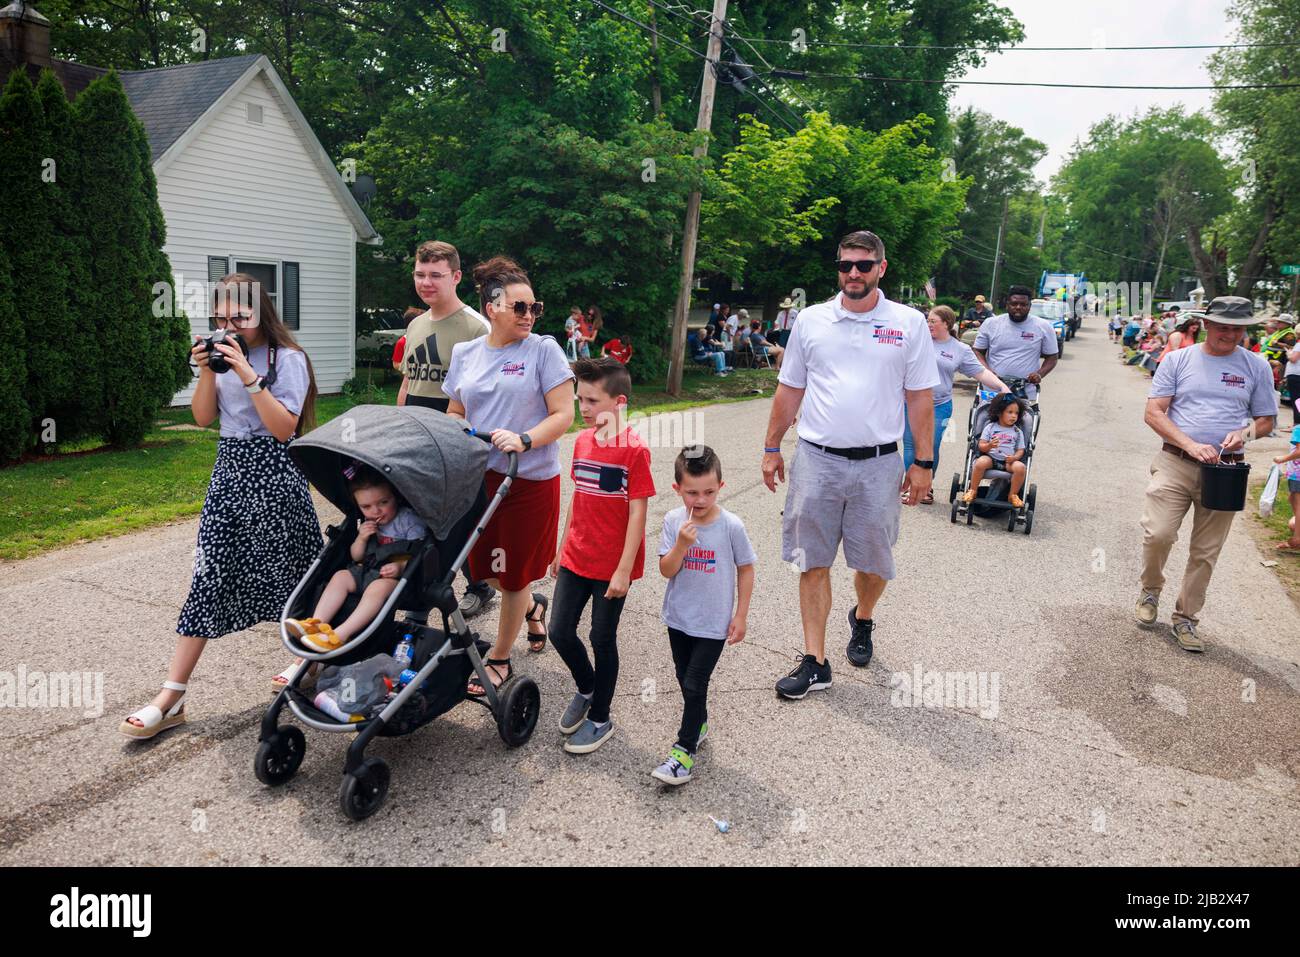 HARRODSBURG, UNITED STATES - 2022/05/21: Republican Monroe County Sheriff Candidate Nathan Williamson marching in the Heritage Days Parade on May 21, 2022 in Harrodsburg, Indiana. (Photo by Jeremy Hogan/The Bloomingtonian) Stock Photo